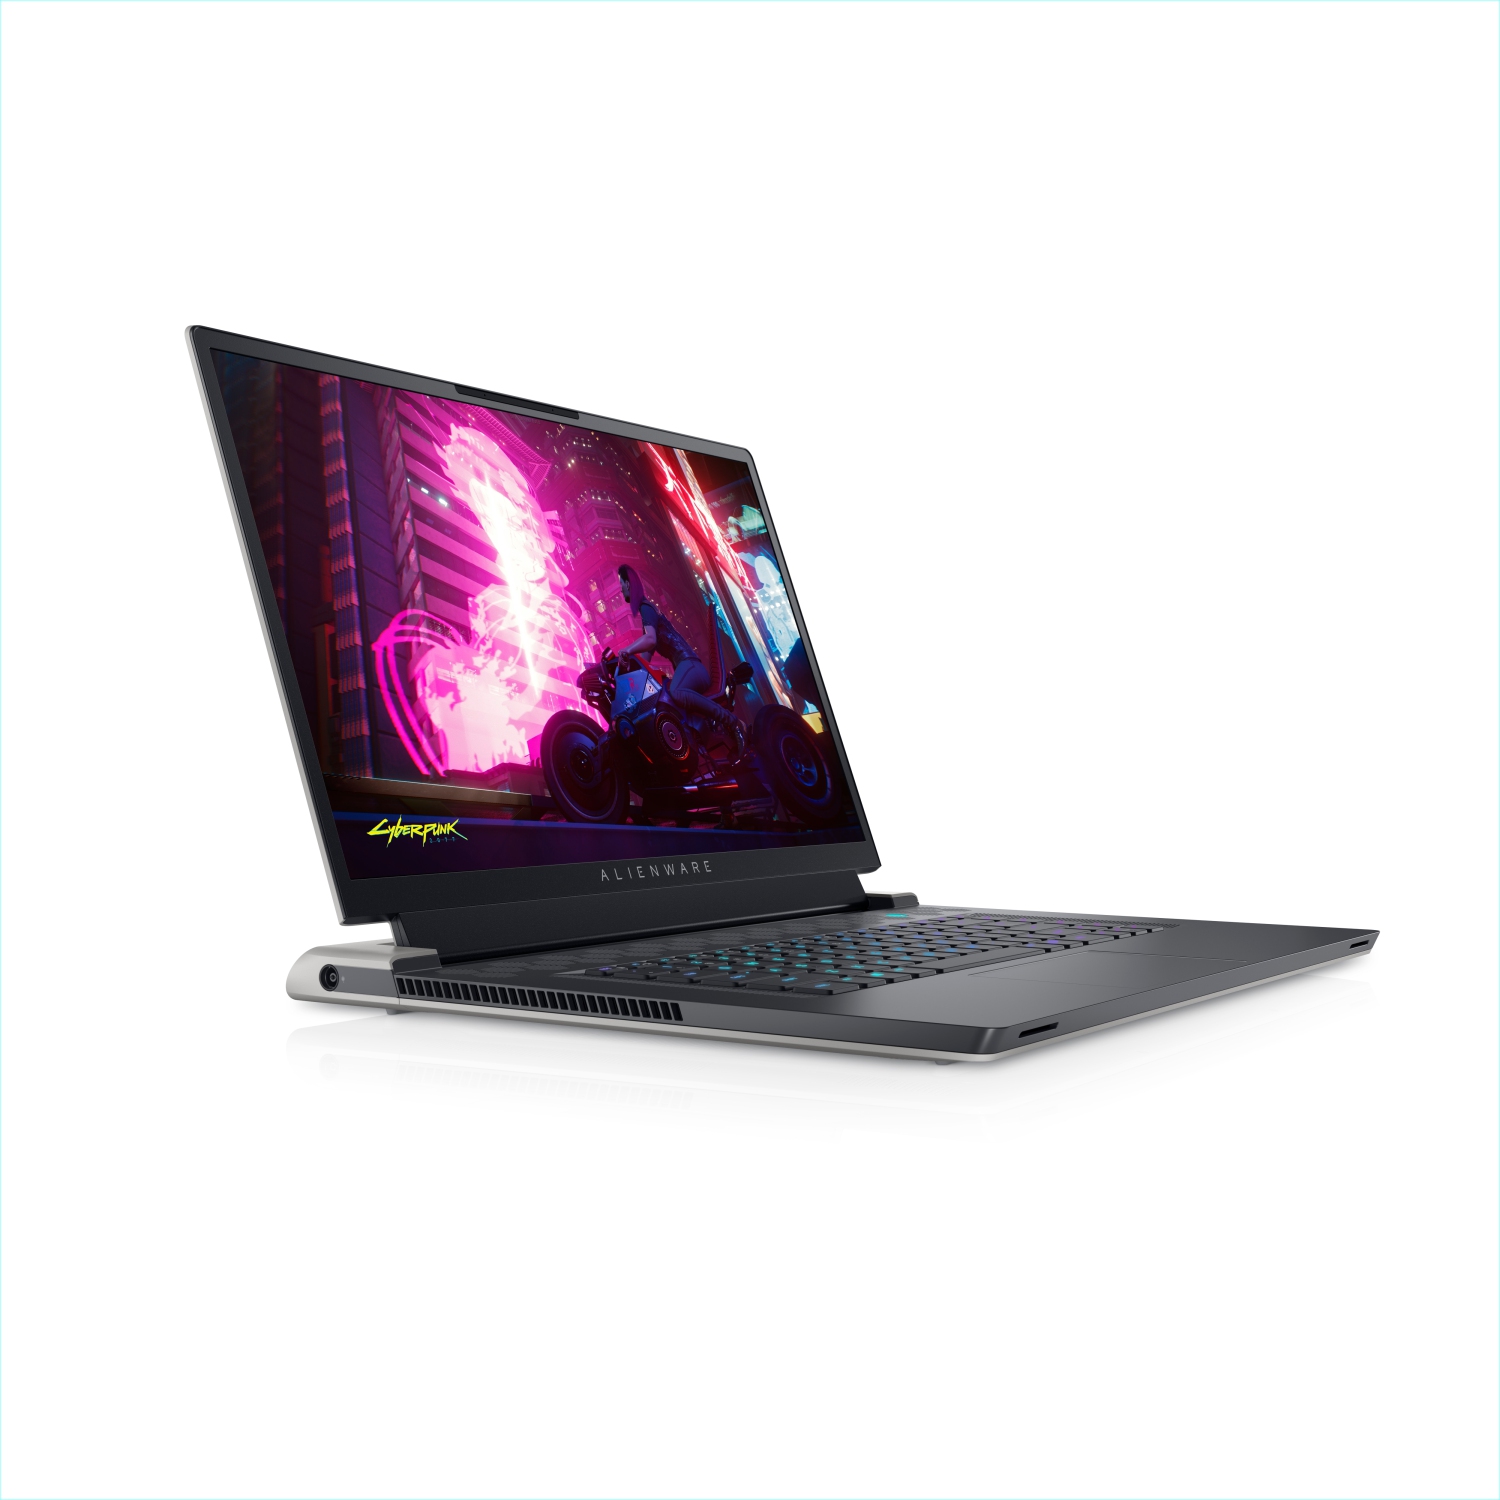 Refurbished (Excellent) - Dell Alienware X17 R1 Gaming Laptop (2021), 17.3" FHD, Core i7, 1TB SSD, 32GB RAM, RTX 3080, 8 Cores @ 4.6 GHz, 11th Gen CPU Certified